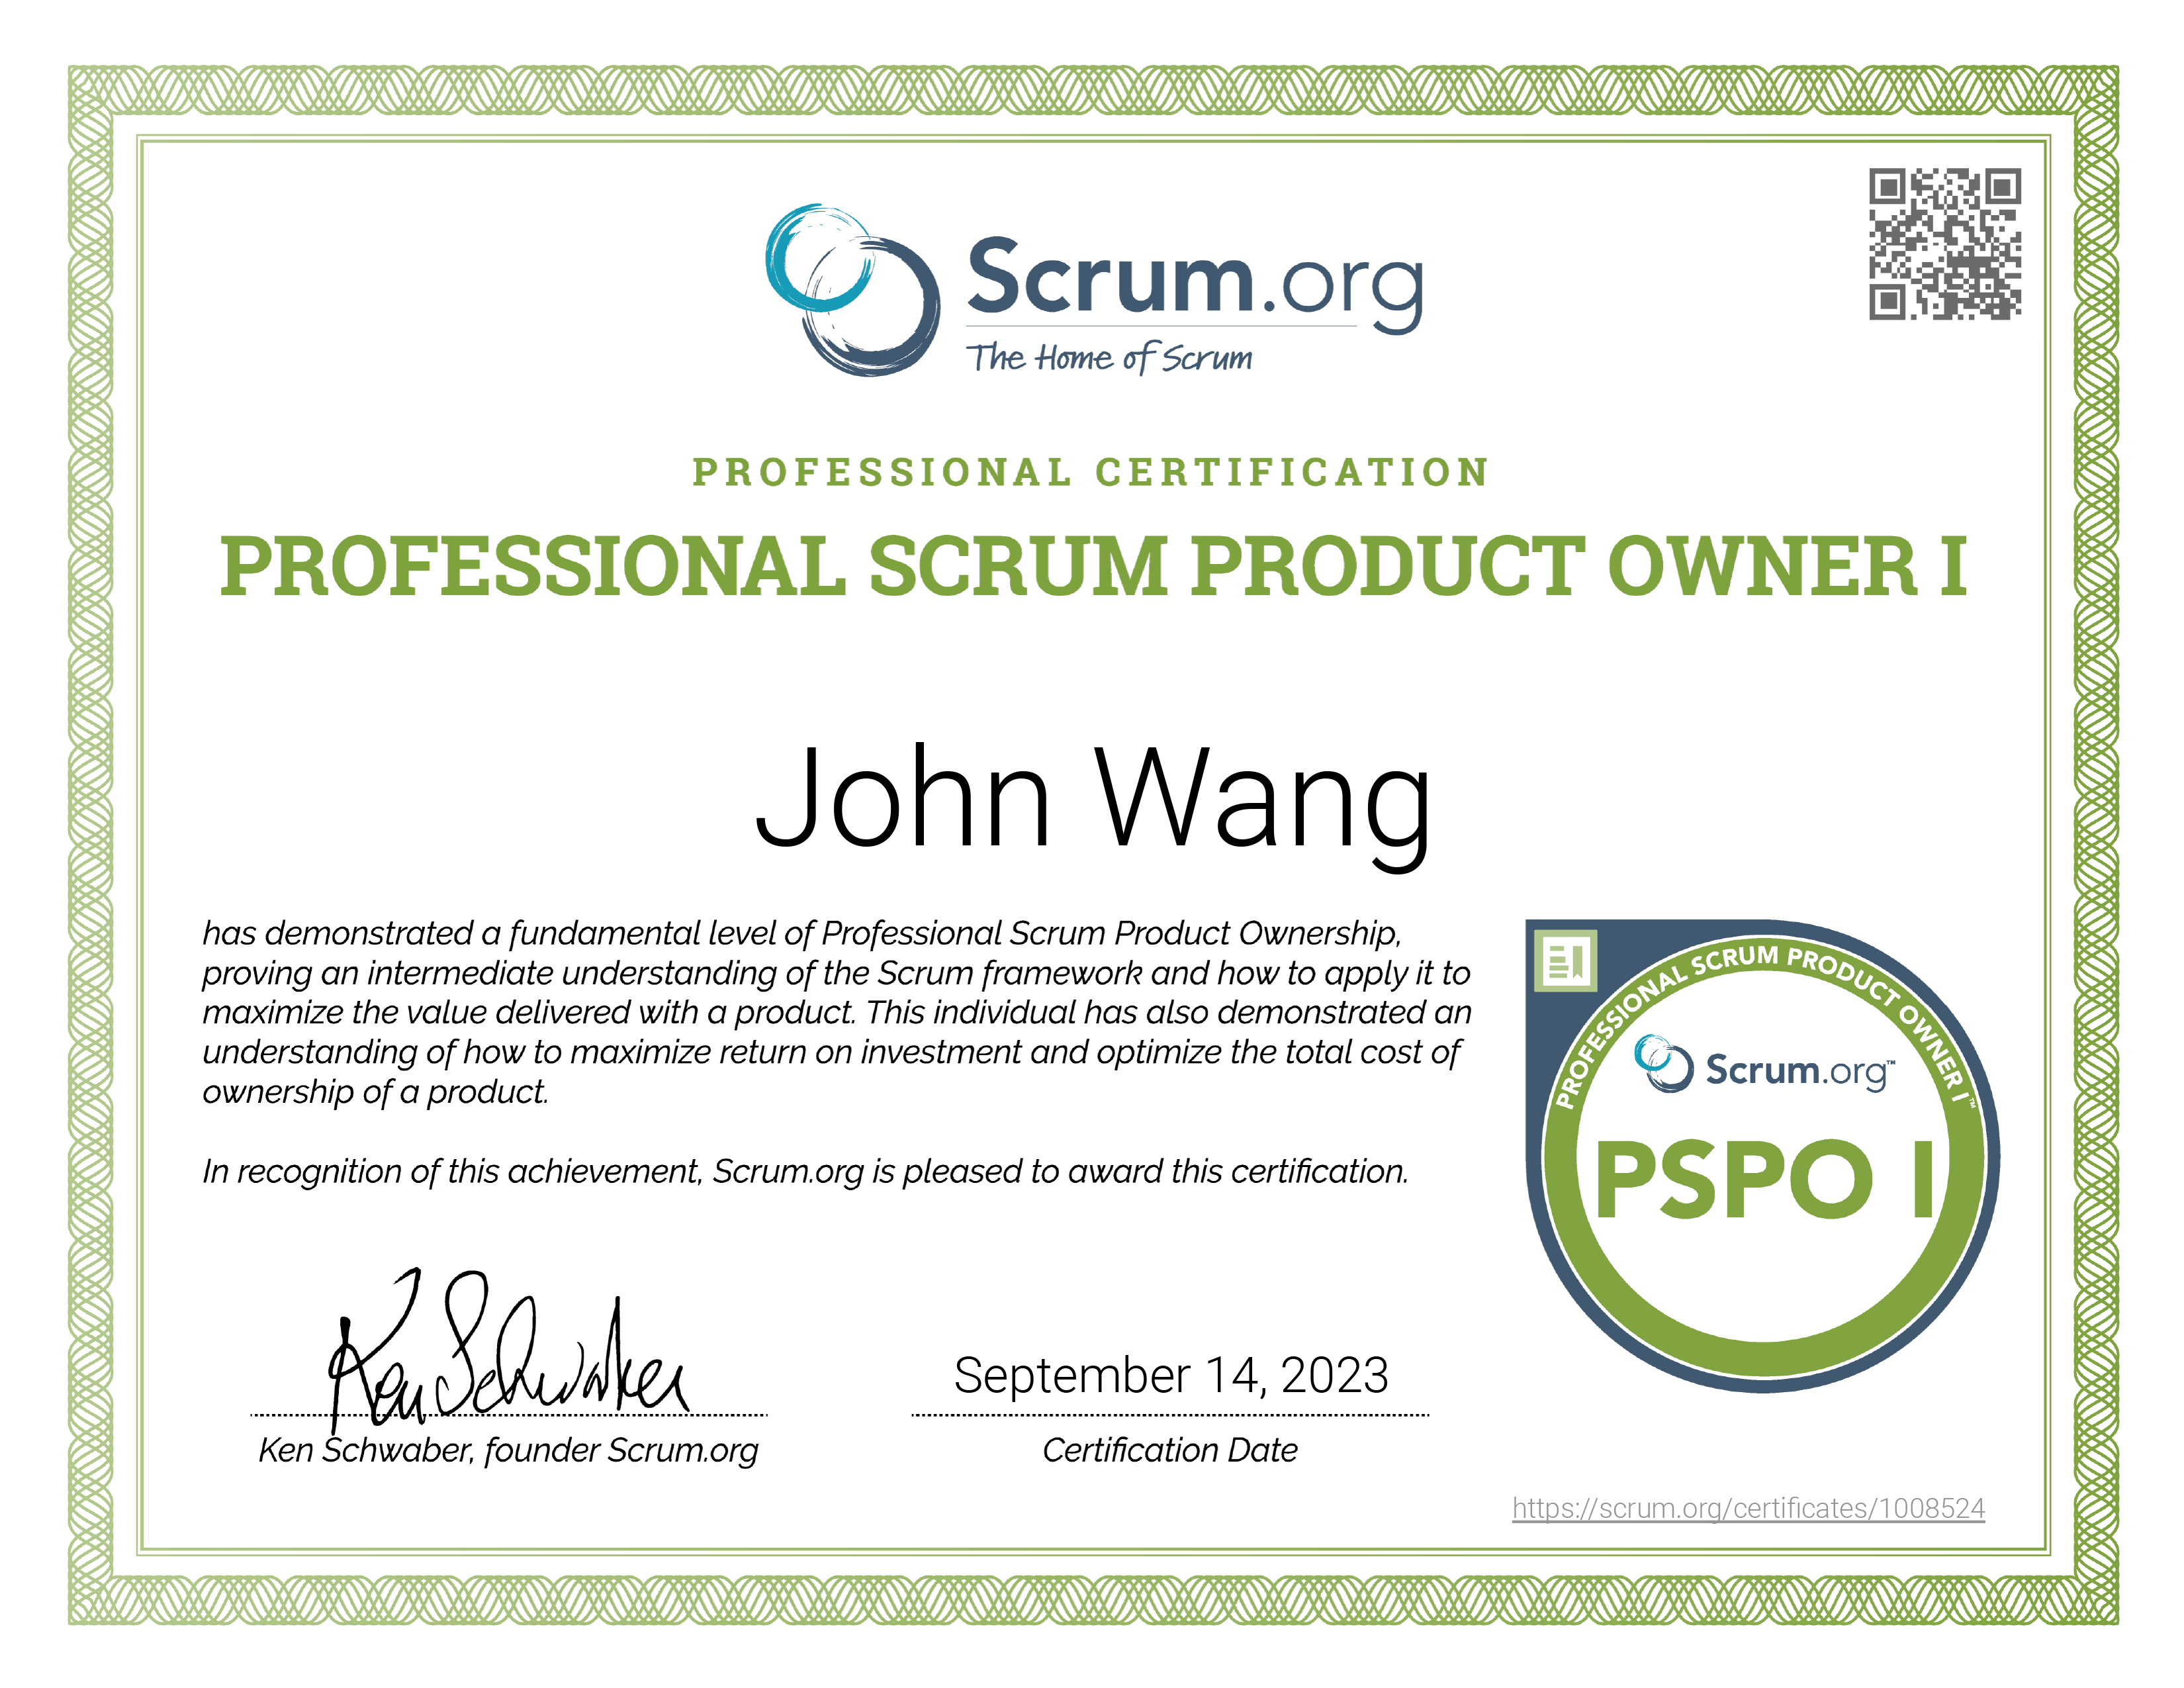 John's Professional Scrum Product Owner I (PSPO I) from Scrum.org